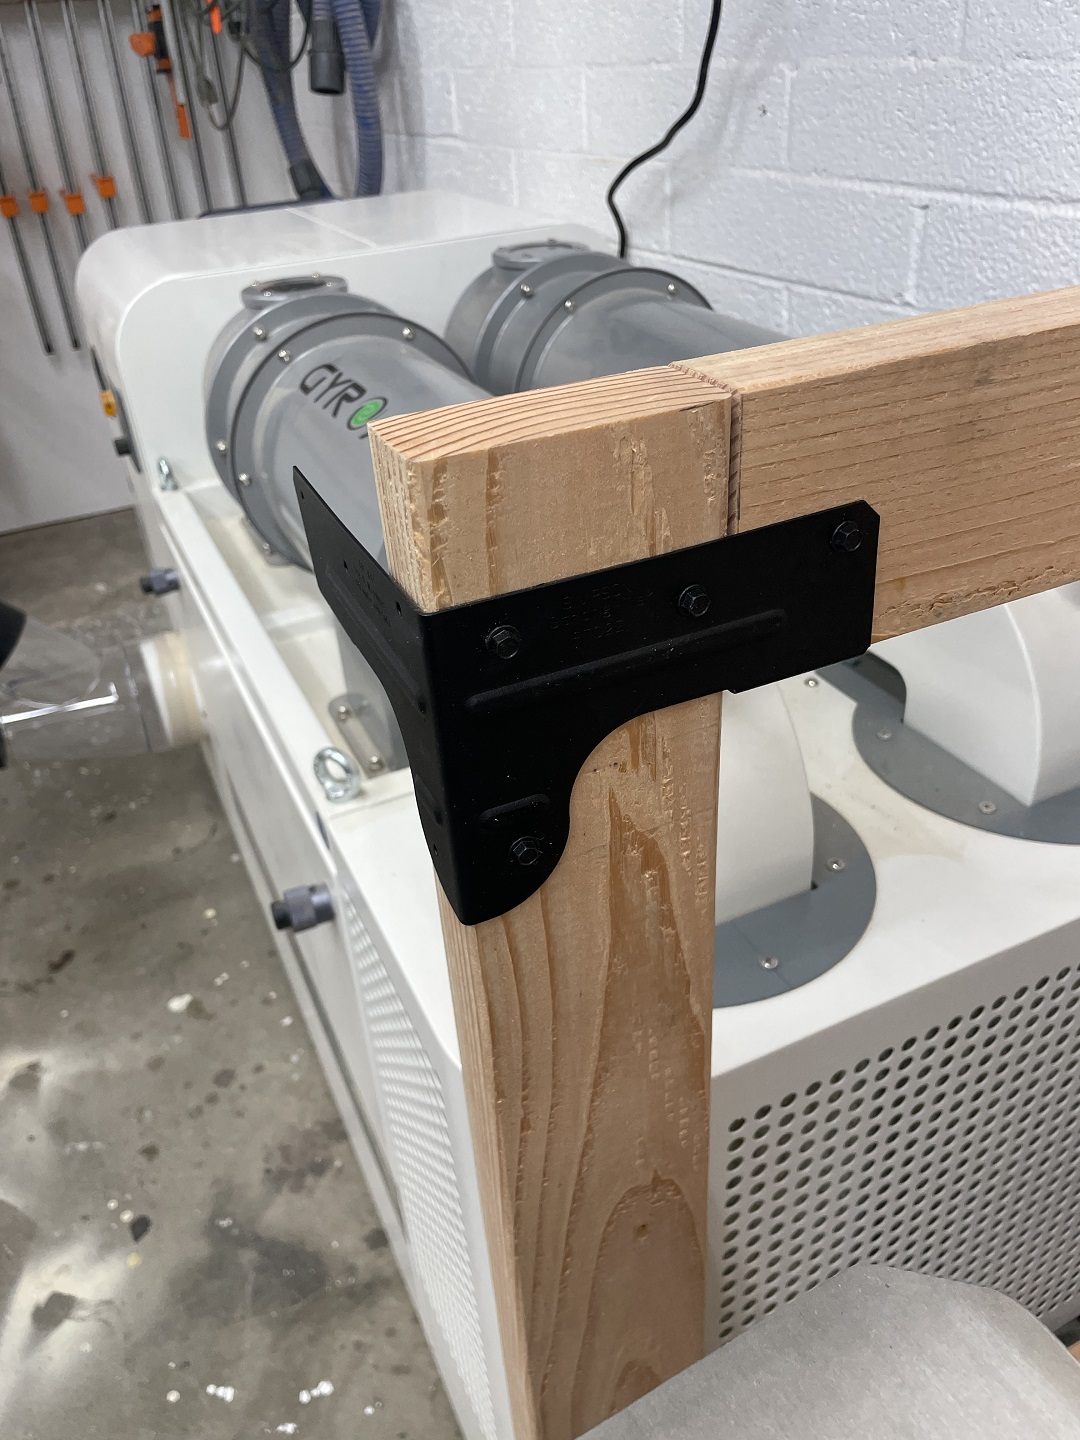 Simpson Strong-Tie Outdoor Accents® APRTC Rigid Tie® Corner Connector attaching the workbench together 